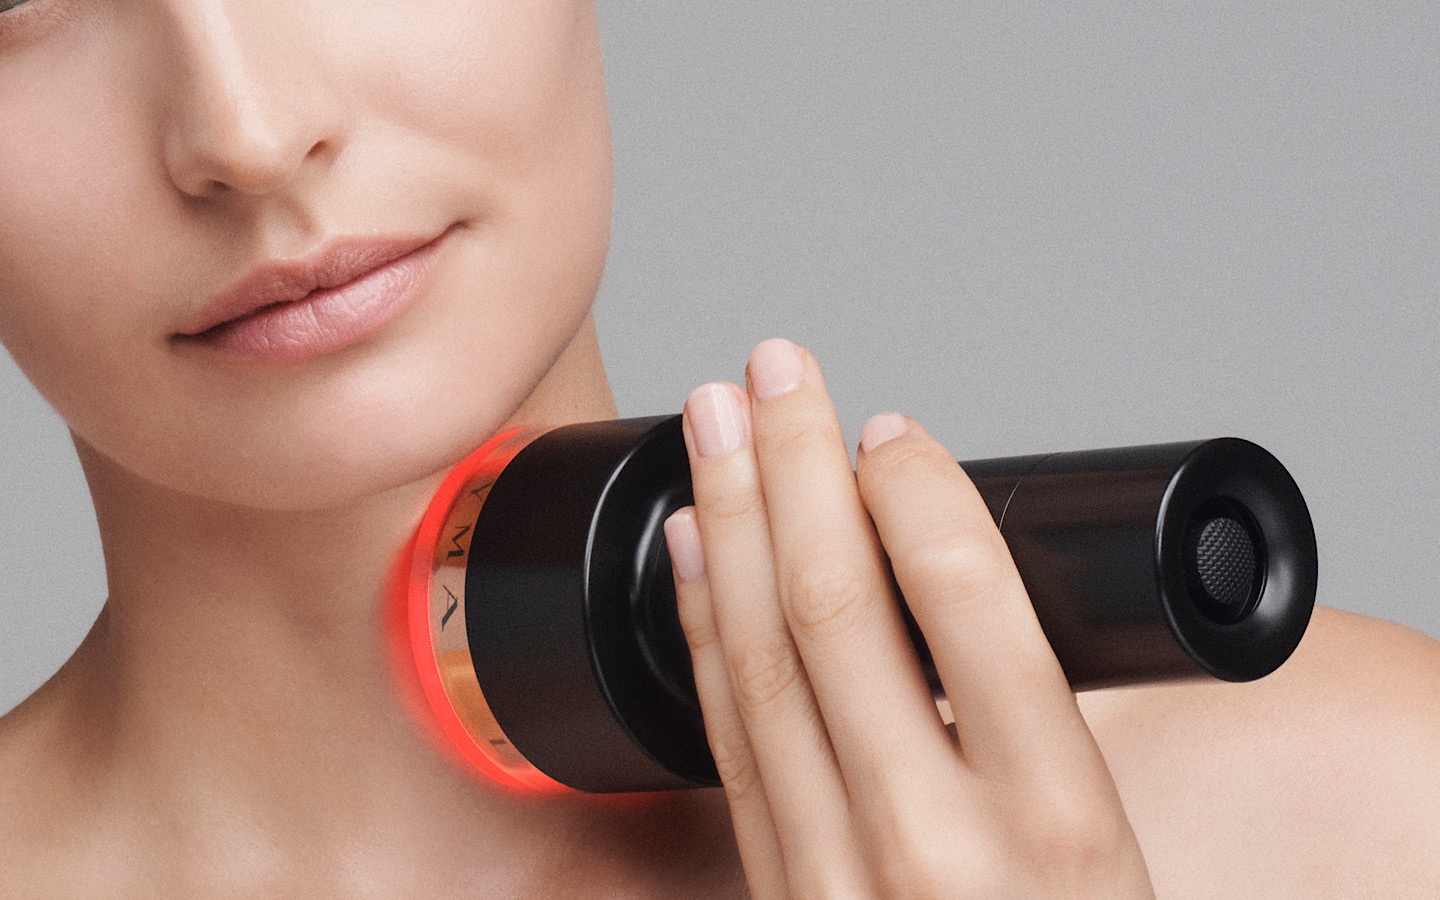 Emma Skeates holds the at-home Laser on face to smooth wrinkles.